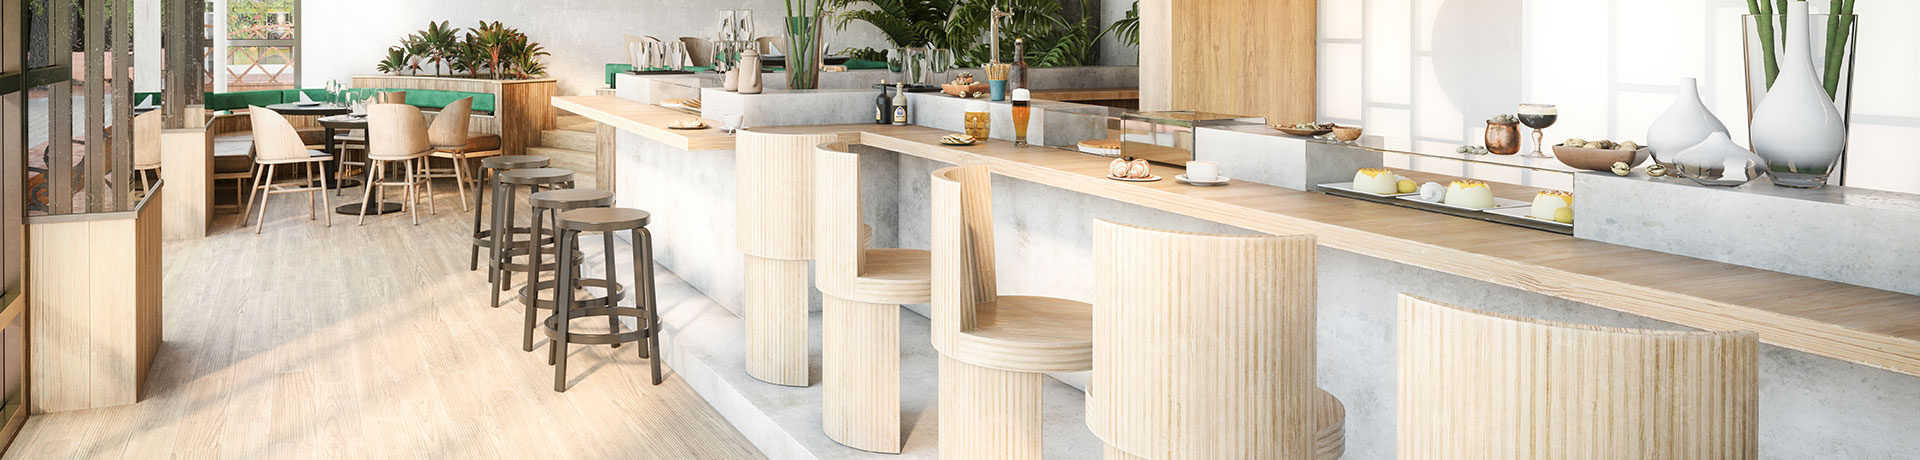 A restaurant with freshly wiped down seating, clean countertops and sterile floors